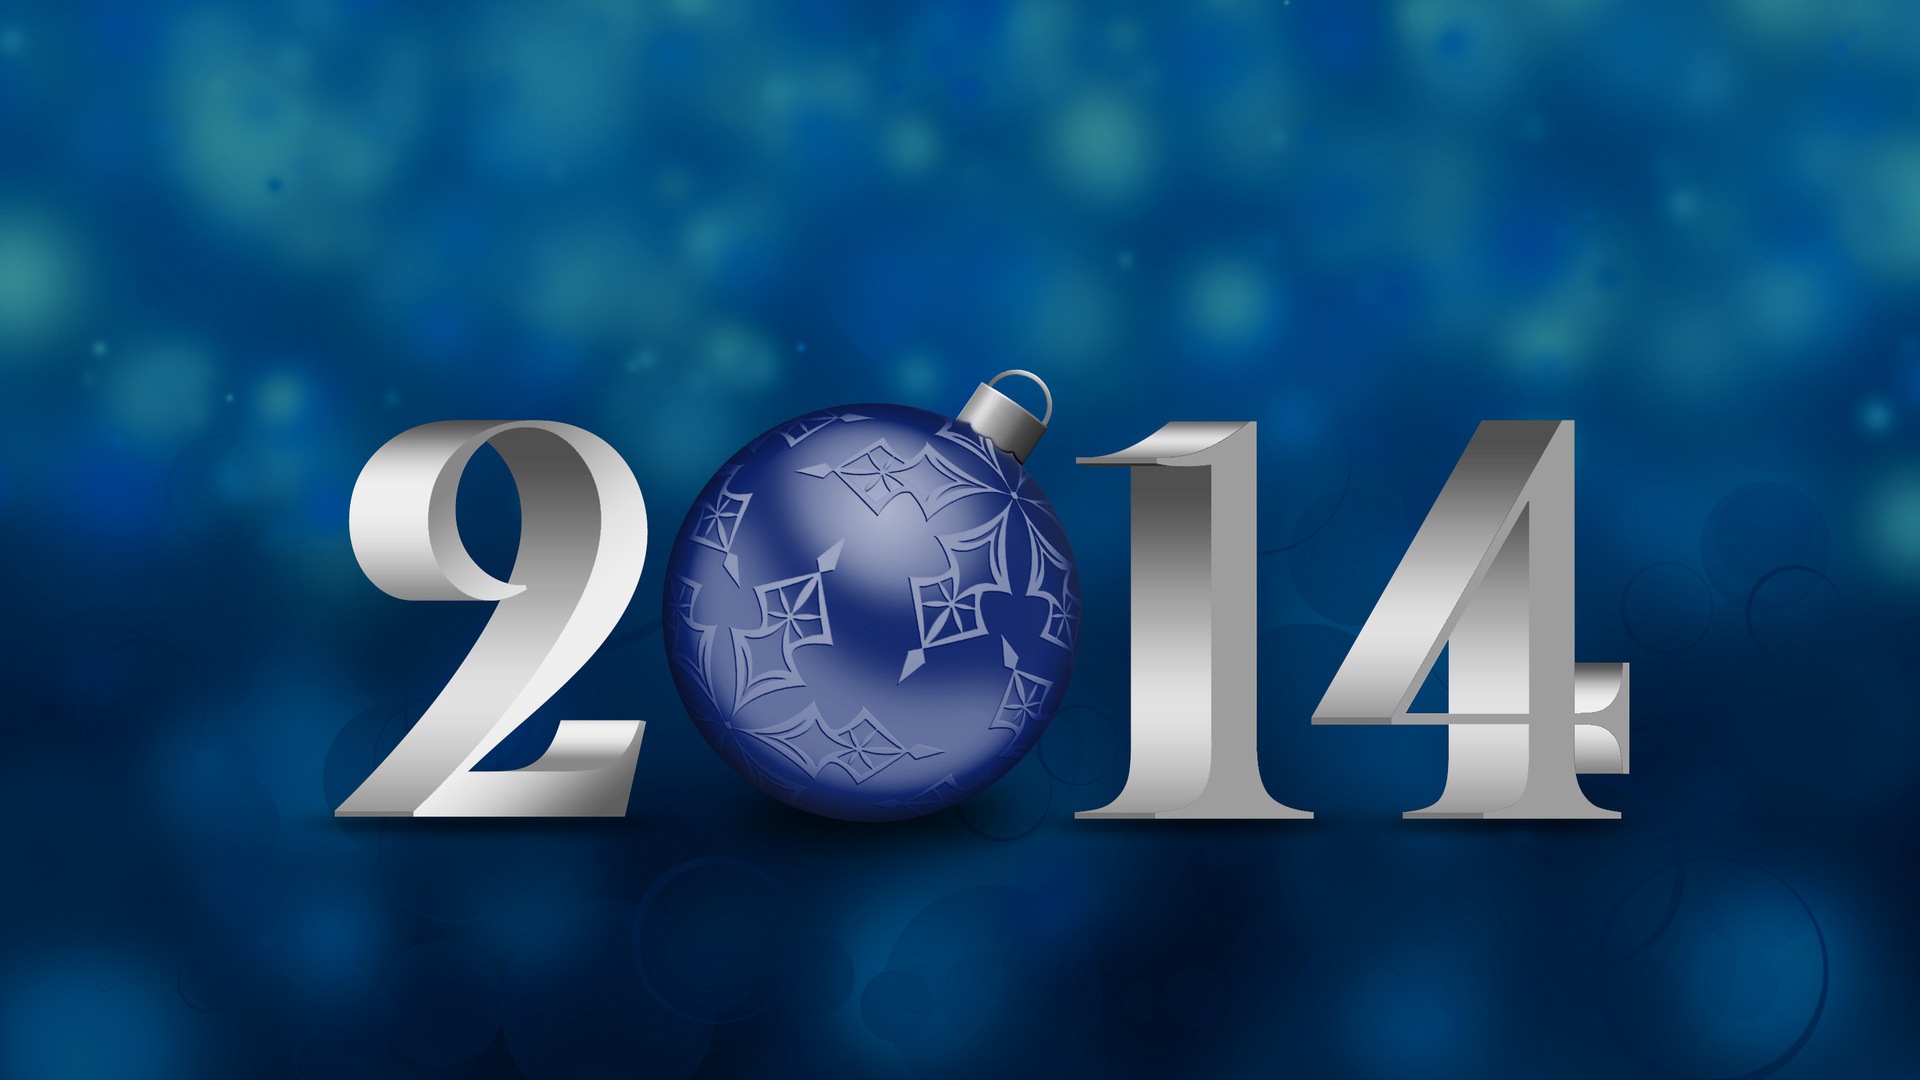 2014 New Year Theme HD Wallpapers (1) #5 - 1920x1080